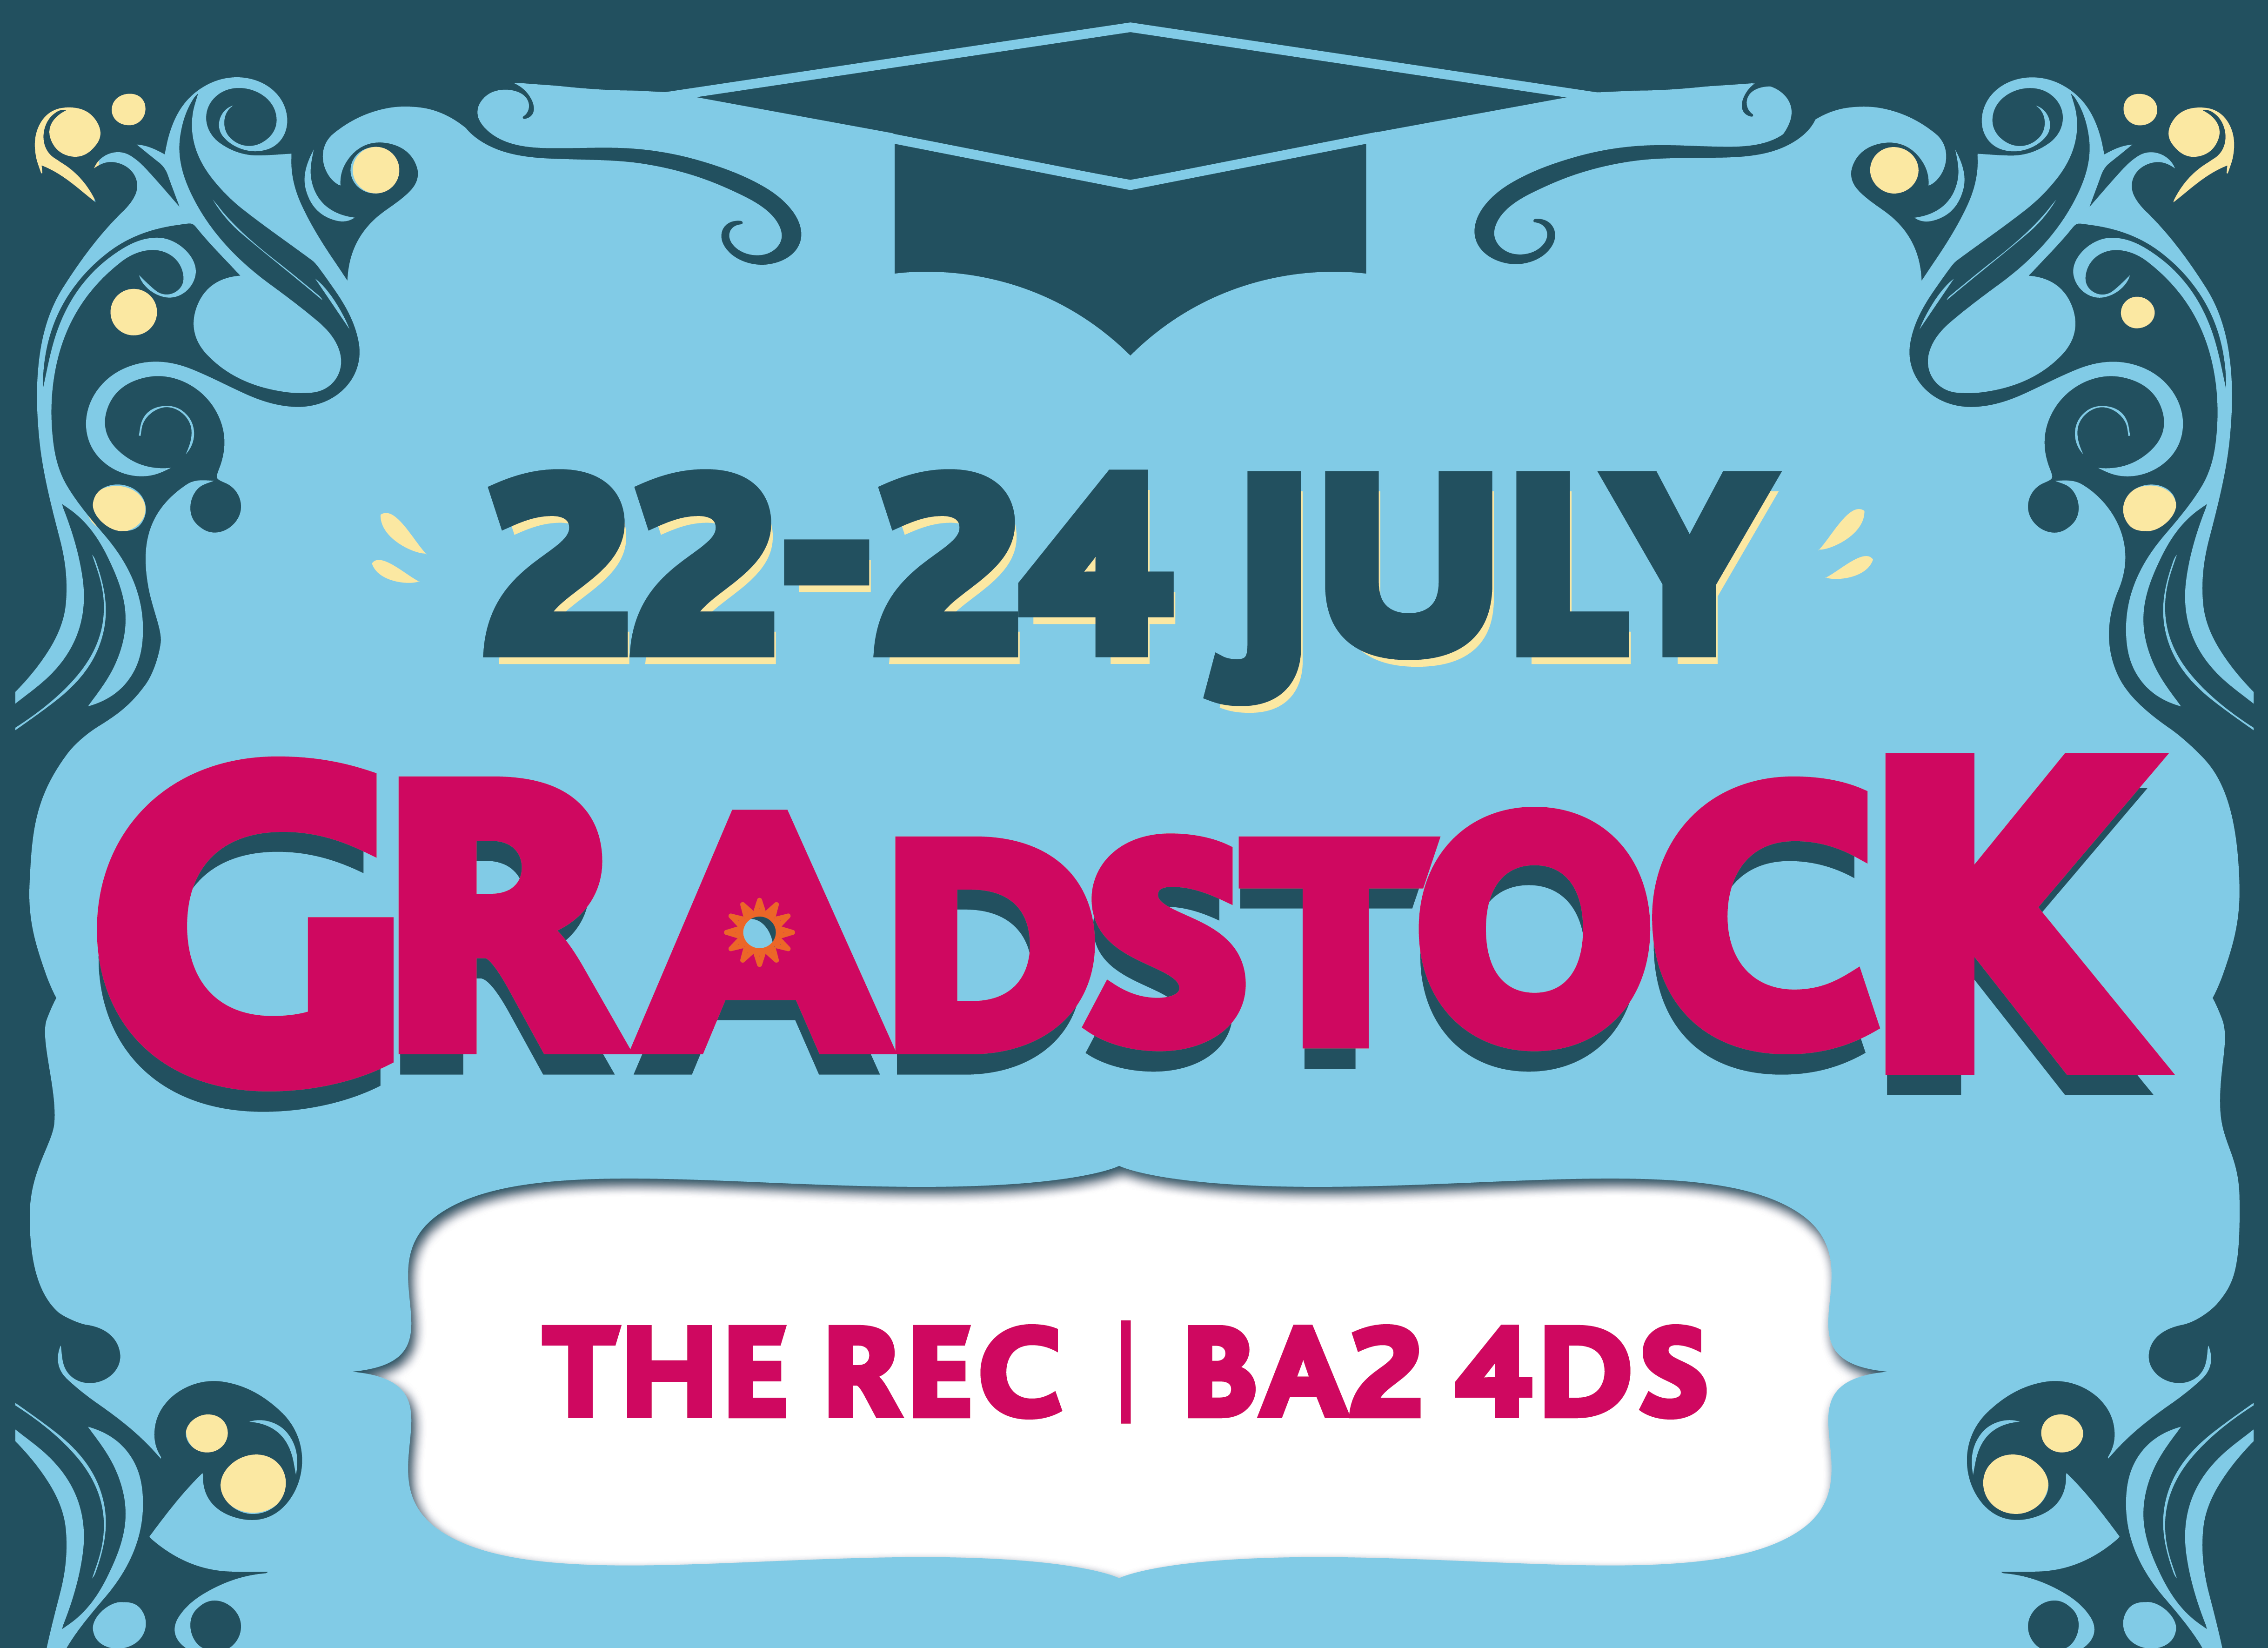 A blue, illustrated banner that reads '22-24 July: Gradstock' followed by 'THE REC, BA2 4DS'